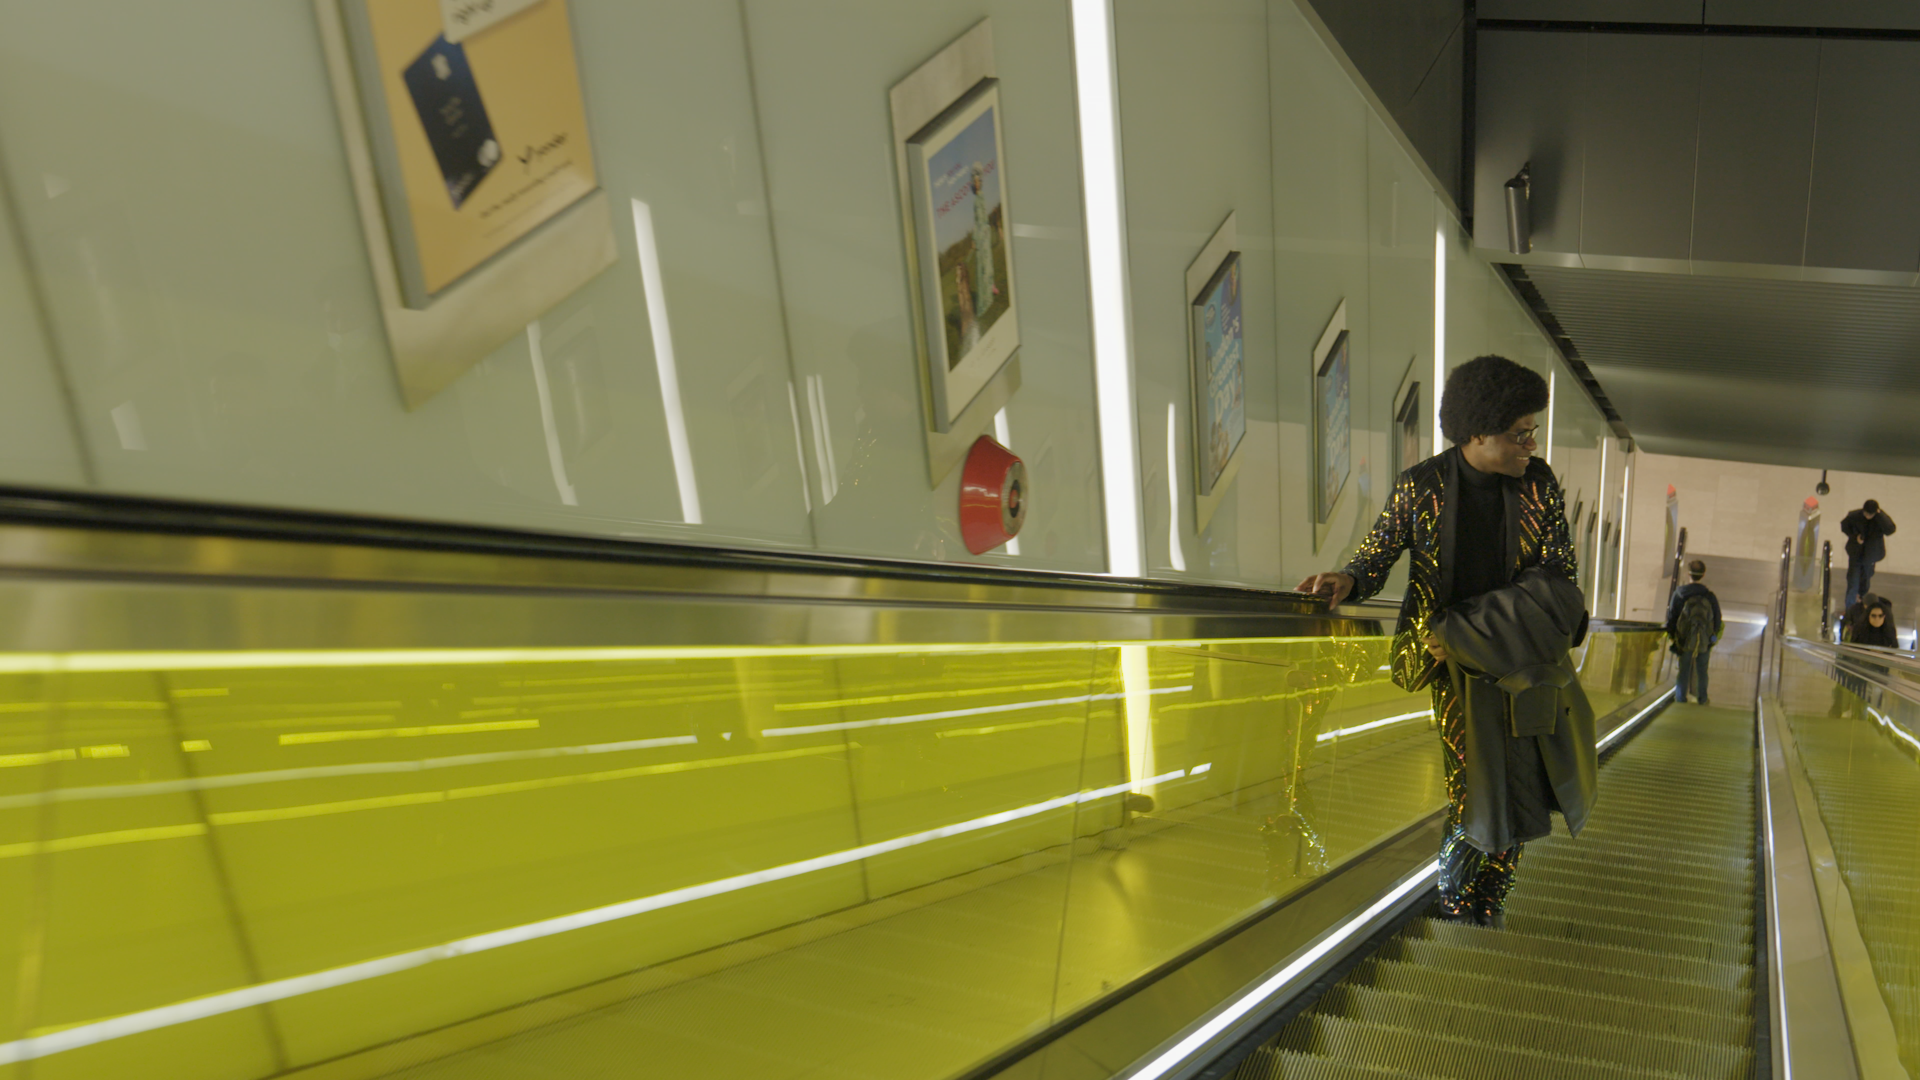 Joel, wearing a glittering suit, smiling as he rides up an escalator